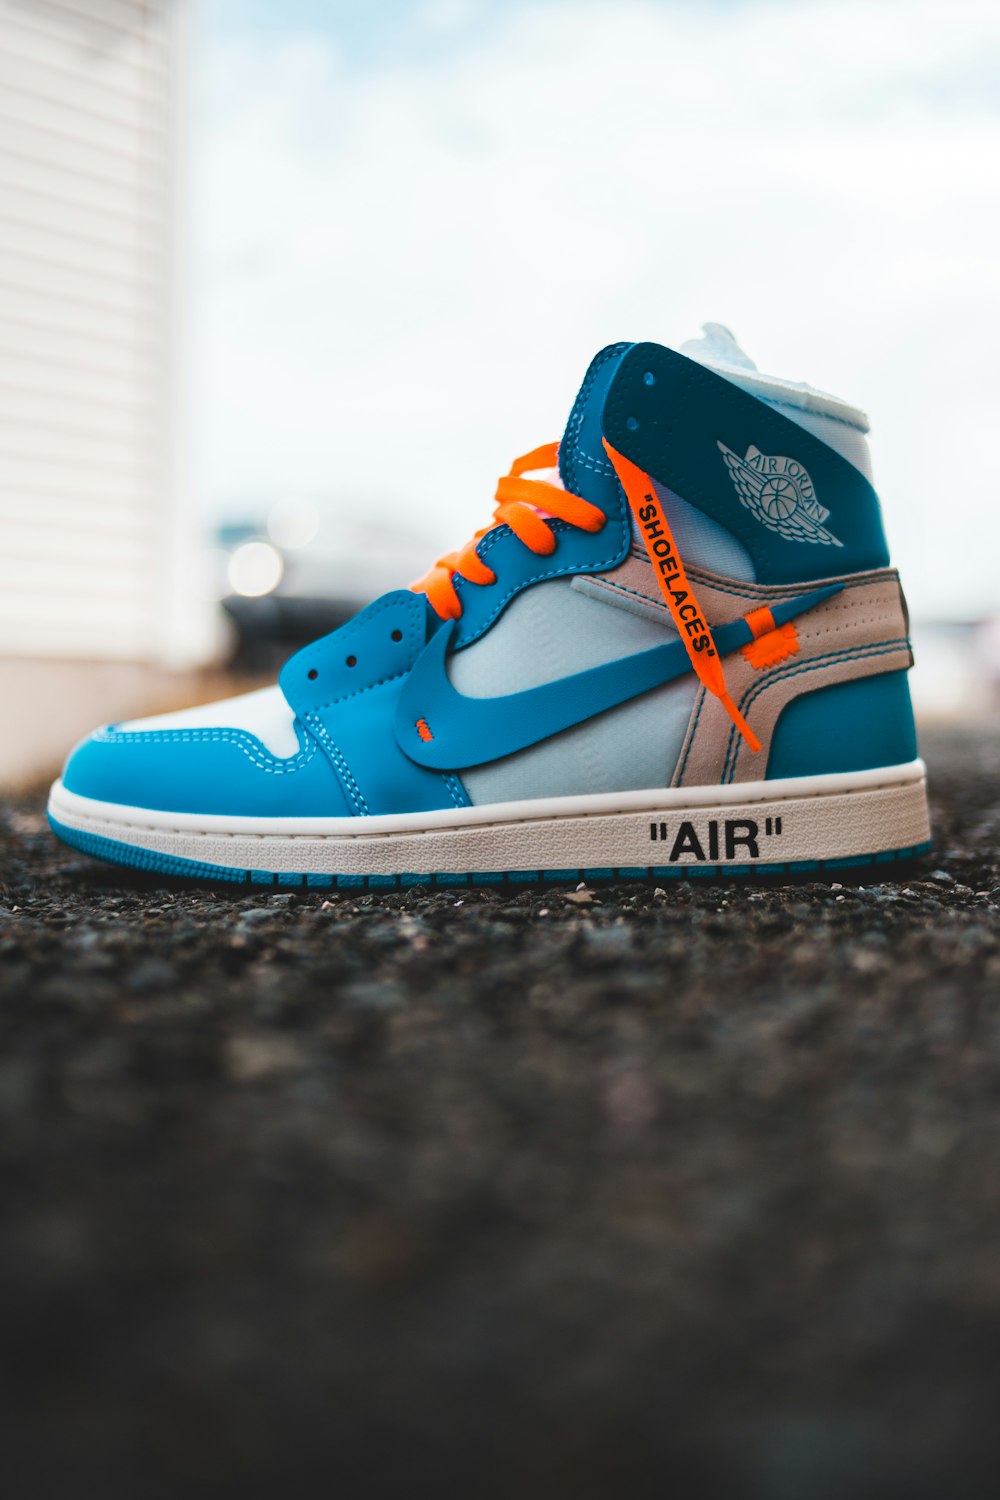 blue and orange nike high top sneakers photo – Free Image on Unsplash